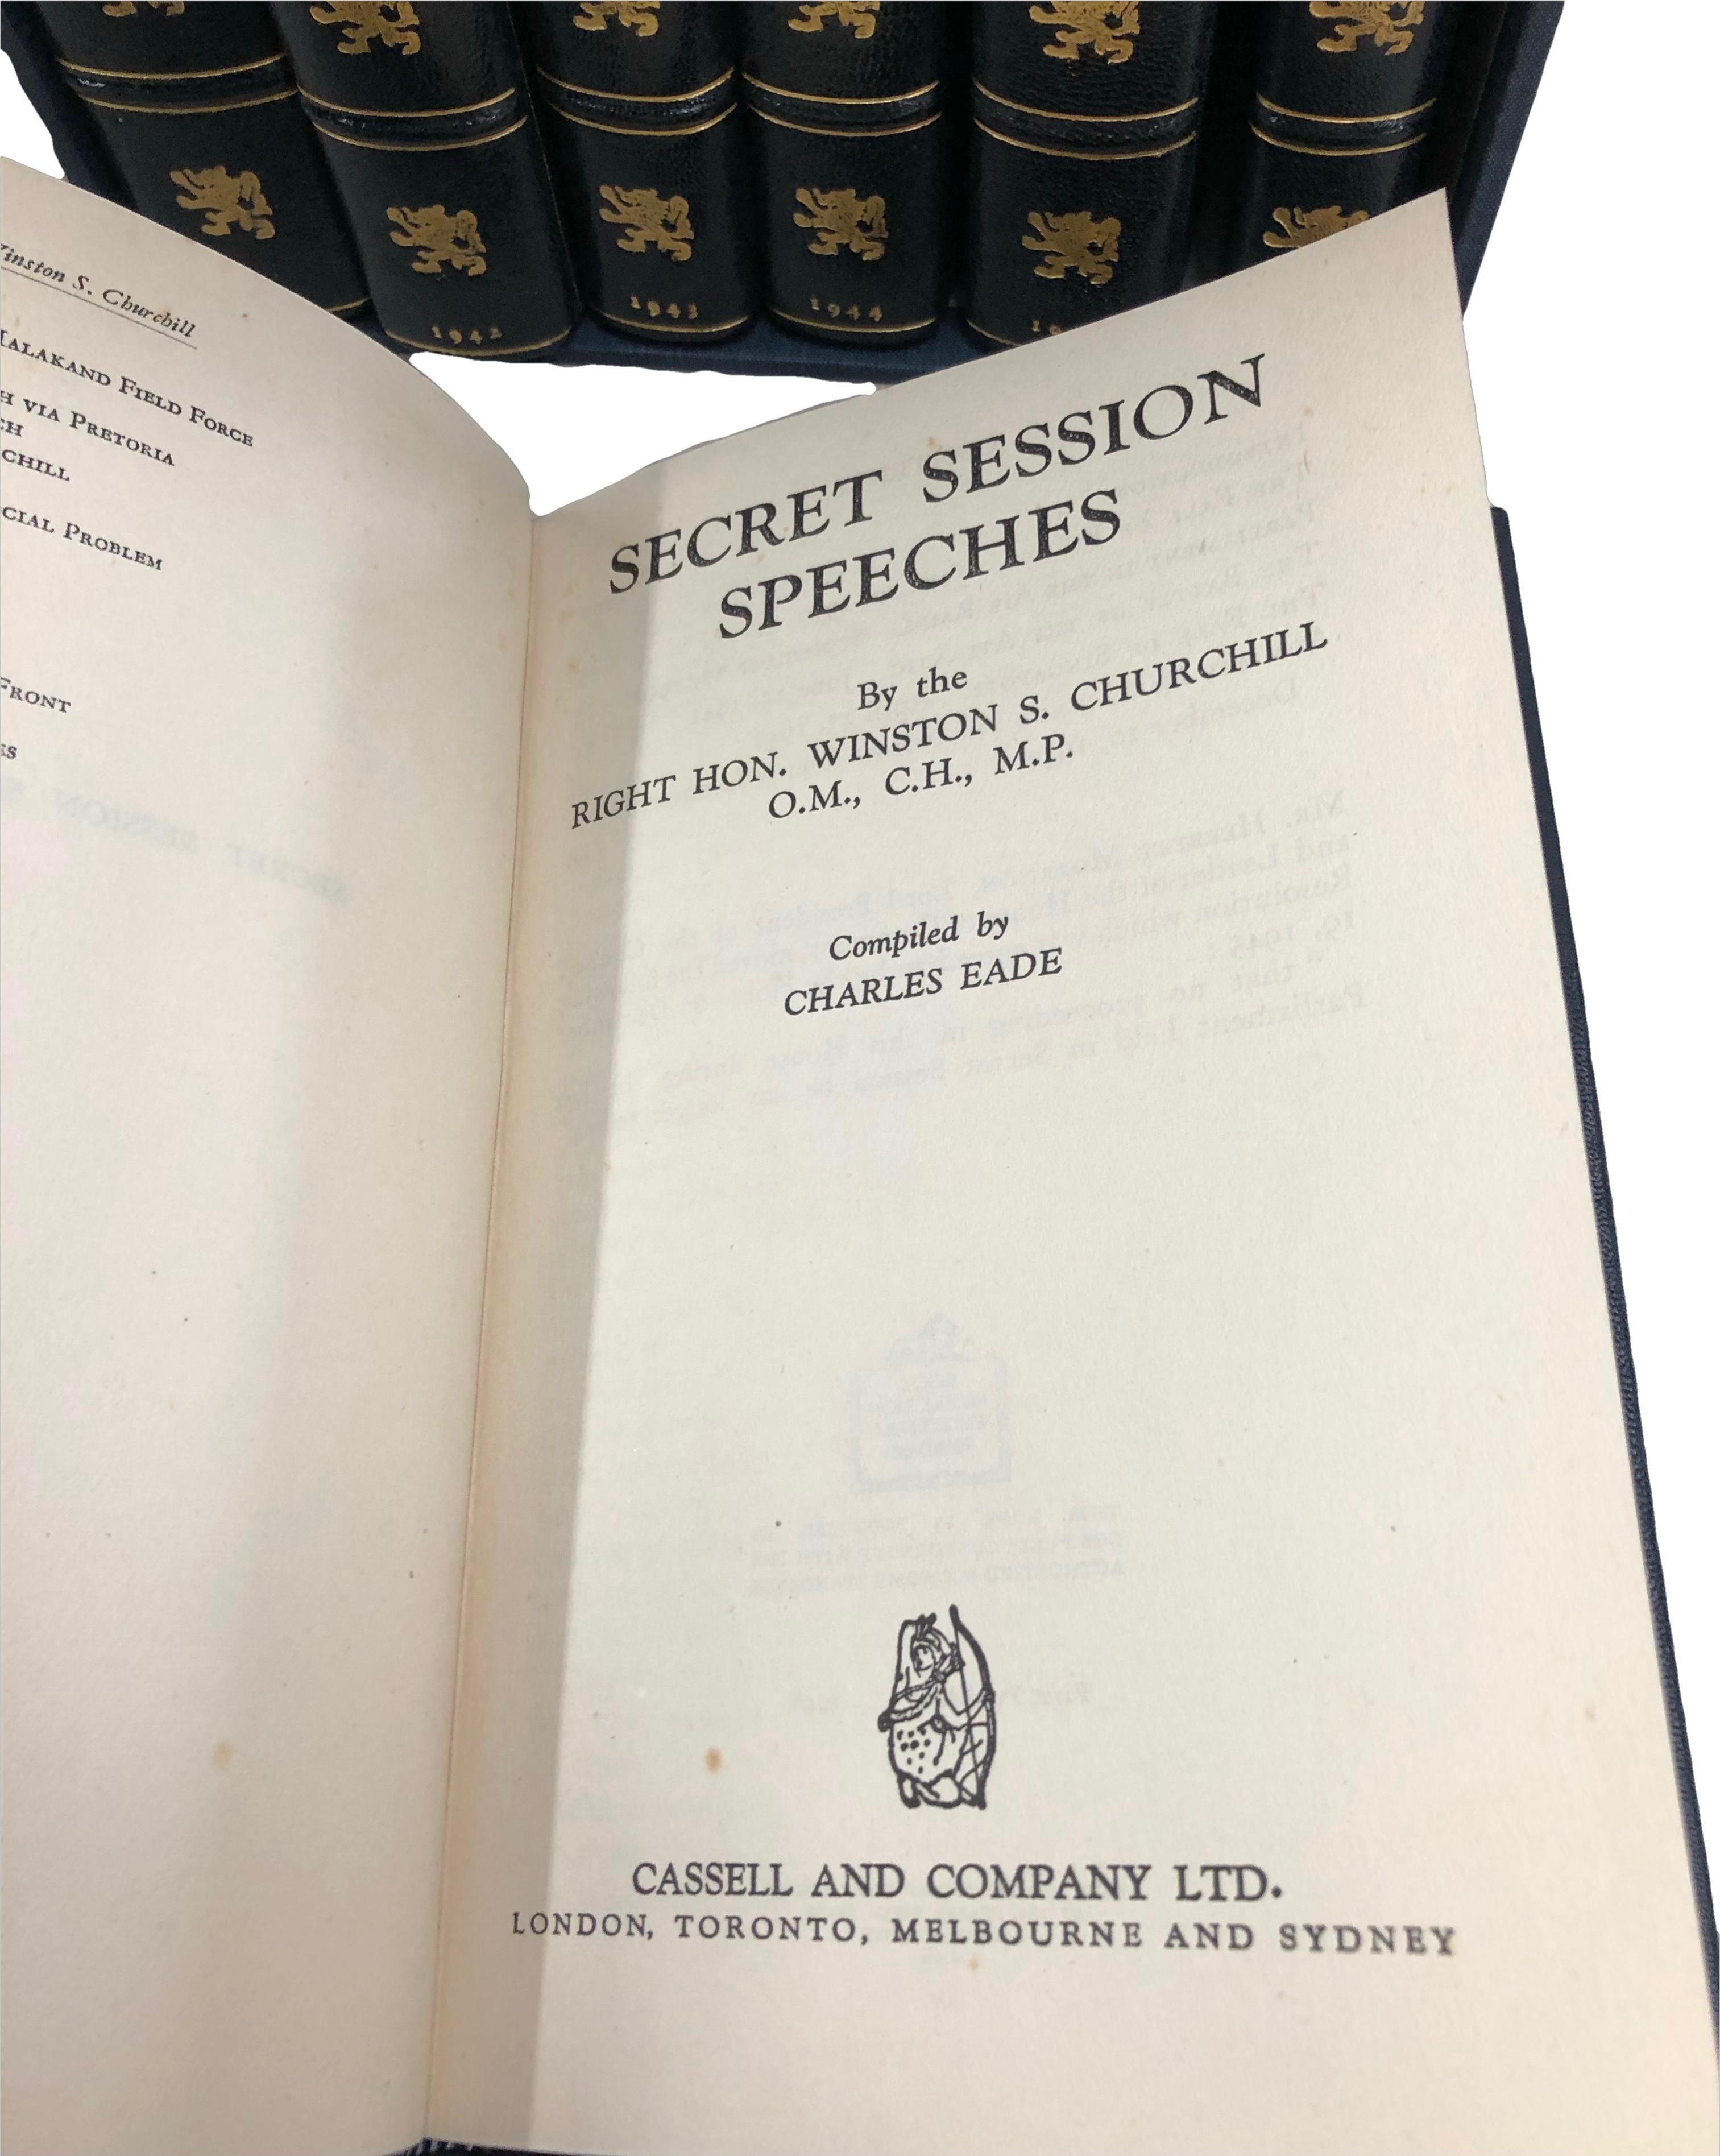 The War Speeches, Secret Session Speeches by W. Churchill, First Ed., Signed 5